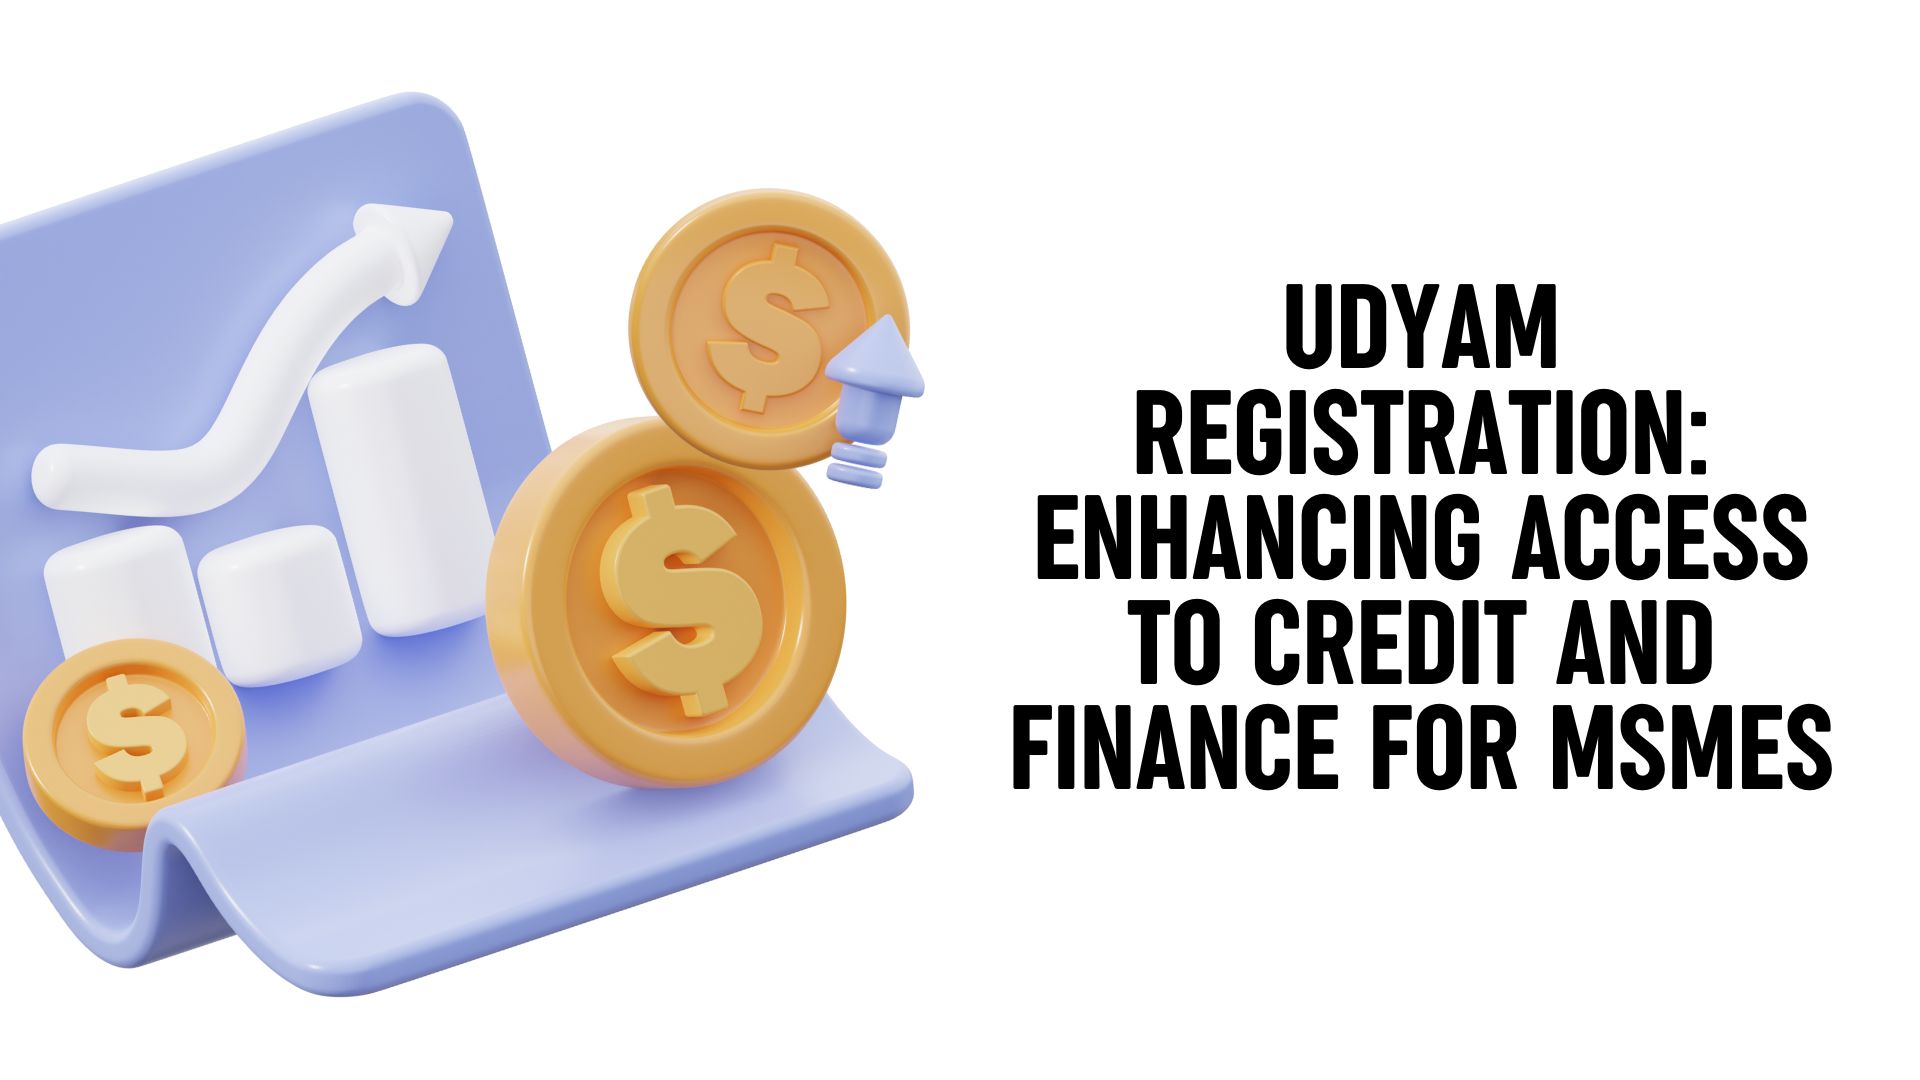 Udyam Registration: Enhancing Access to Credit and Finance for MSMEs